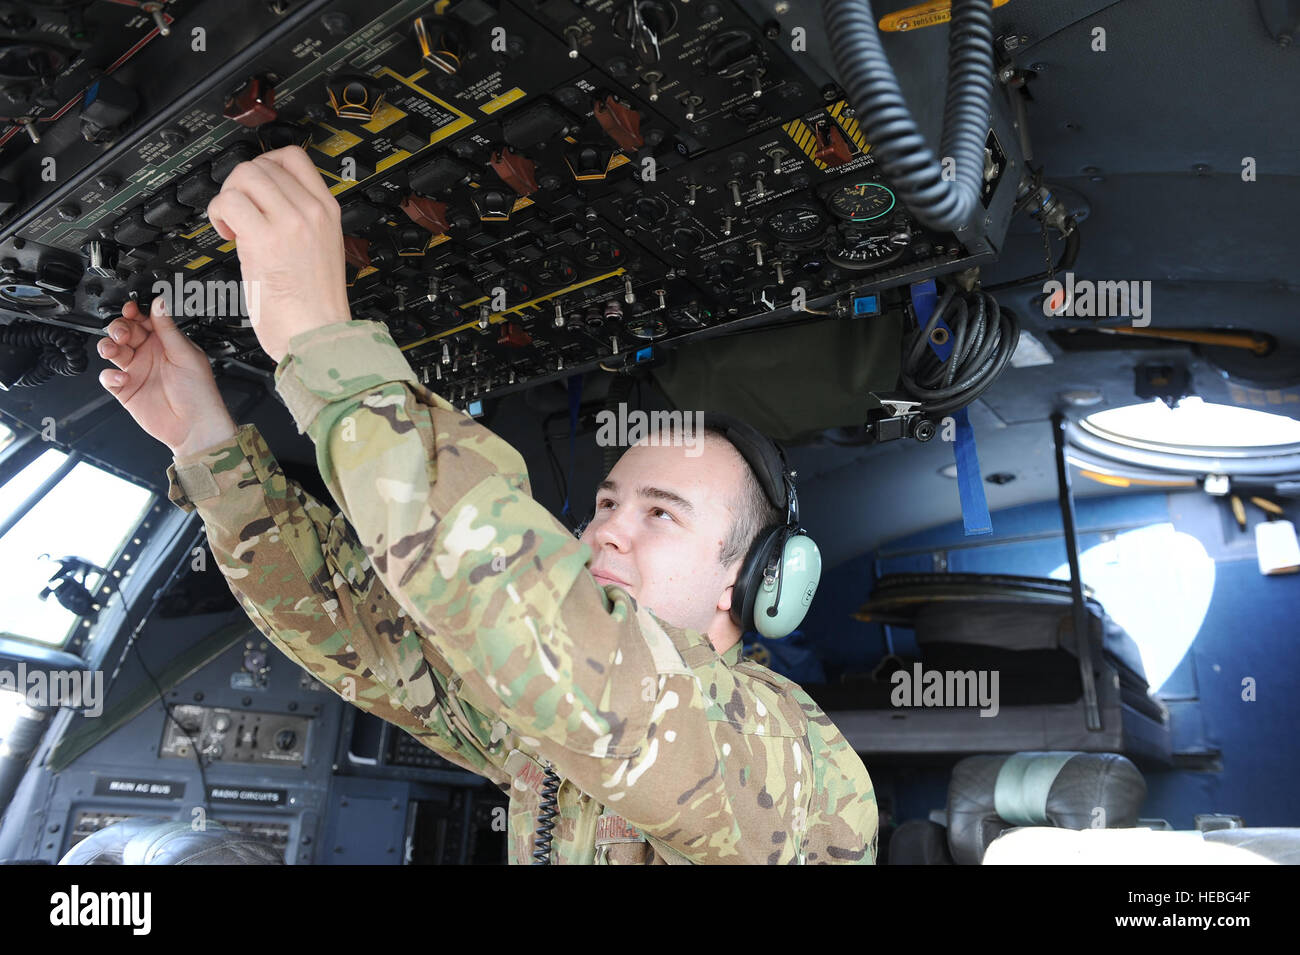 Airman 1st Class Michael Amerson is a C-130H flight engineer deployed to the 737th Expeditionary Airlift Squadron, undisclosed location, Southwest Asia. This is his first deployment and he is enjoying learning new things about how the aircraft is operated in a desert environment compared to his home station, the 144th Airlift Squadron at Joint base Elmendorf-Richardson, Alaska. Amerson, a native of Eagle River, Alaska, has been chosen by his leadership as this week's Rock Solid Warrior. (U.S. Air Force photo by Master Sgt. Marelise Wood) Stock Photo